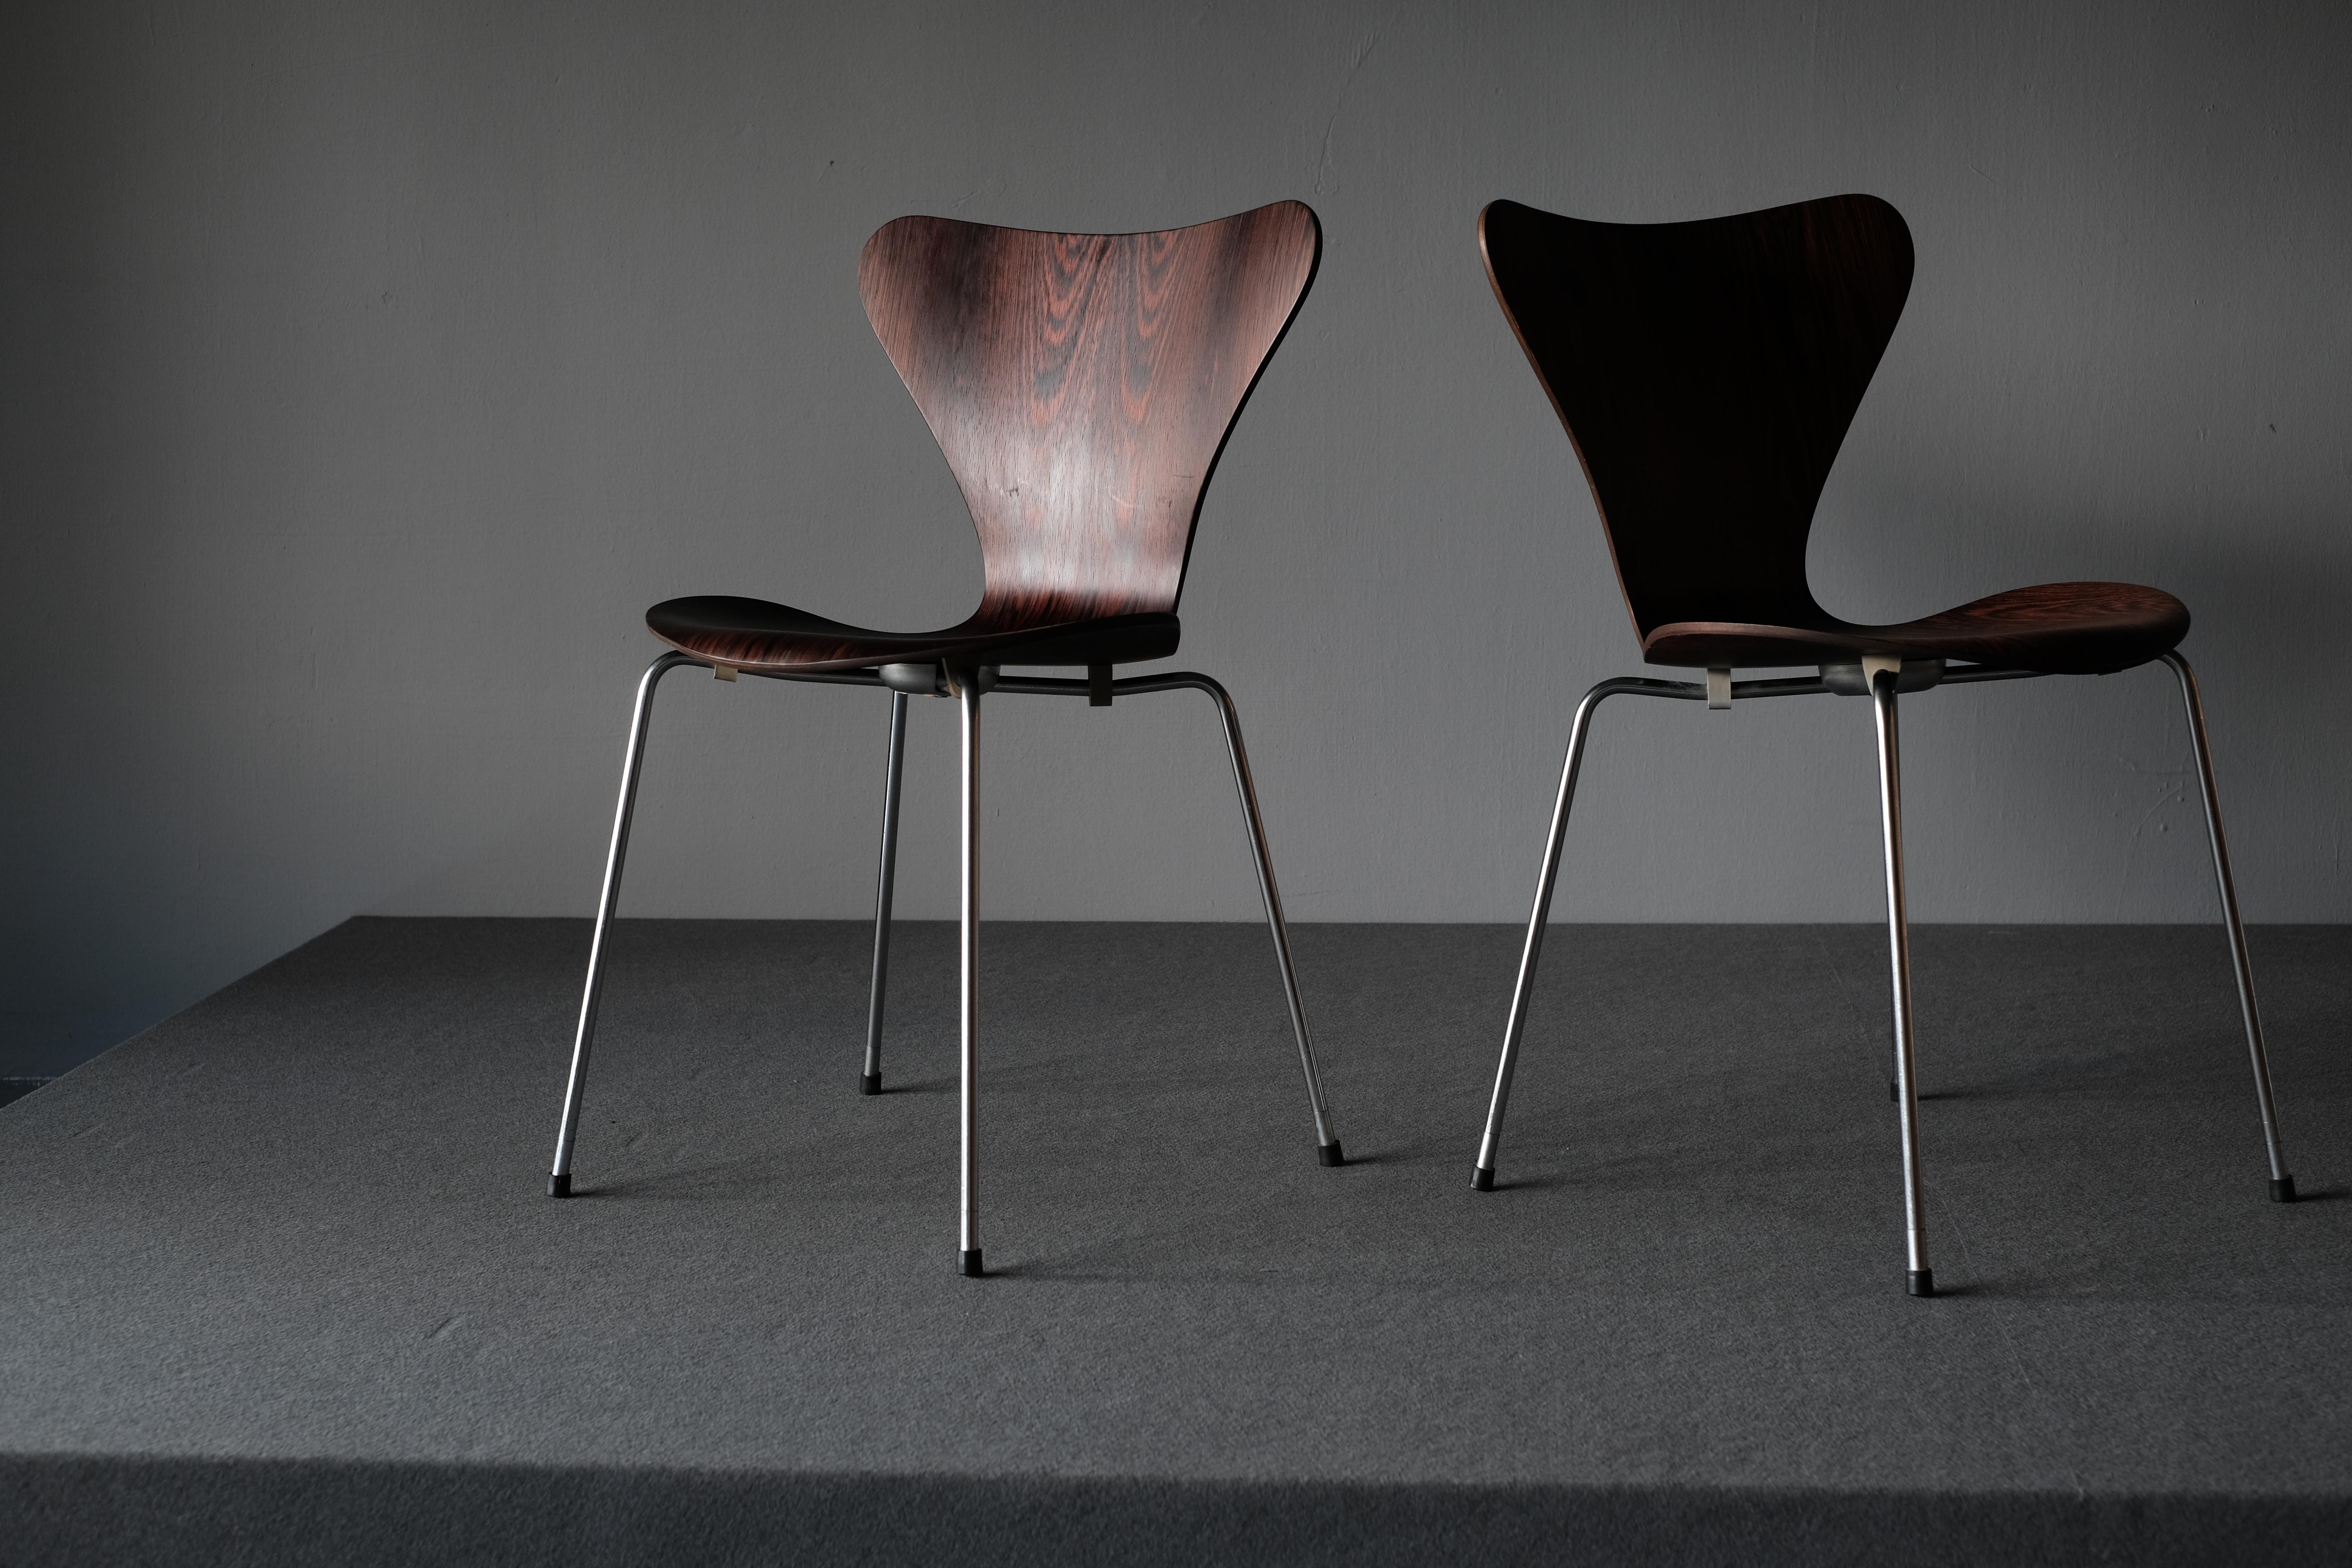 A pair of “Series 7” chairs by Arne Jacobsen. These chairs have a plywood shell with chromium-plated steel legs. They are in Brazillian rosewood with the most amazing grain and patina. Model 3107. Designed in 1955. Manufactured and marked by Fritz